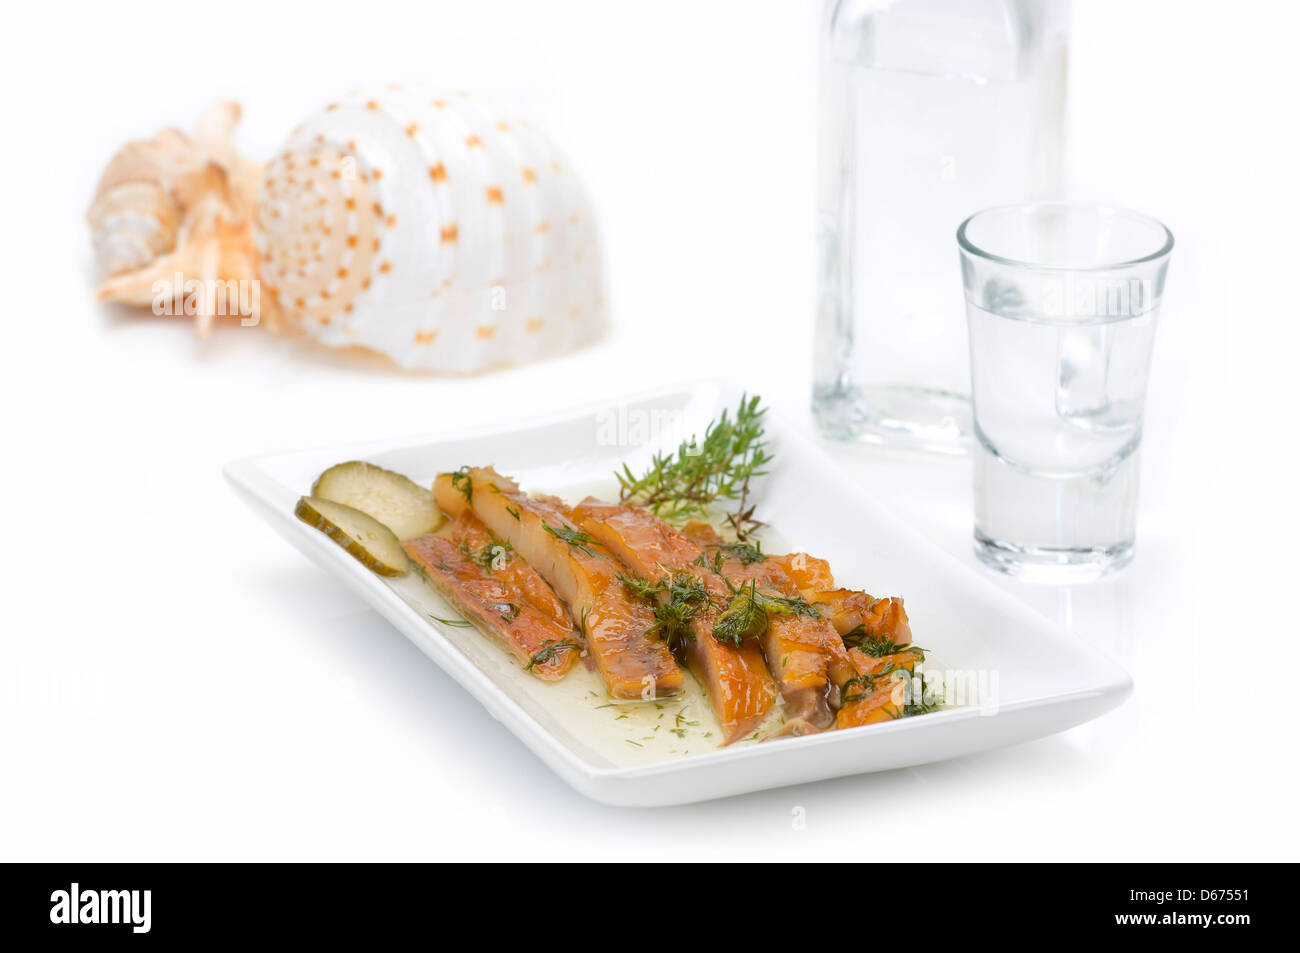 sun dried fish fillet served with ouzo Stock Photo